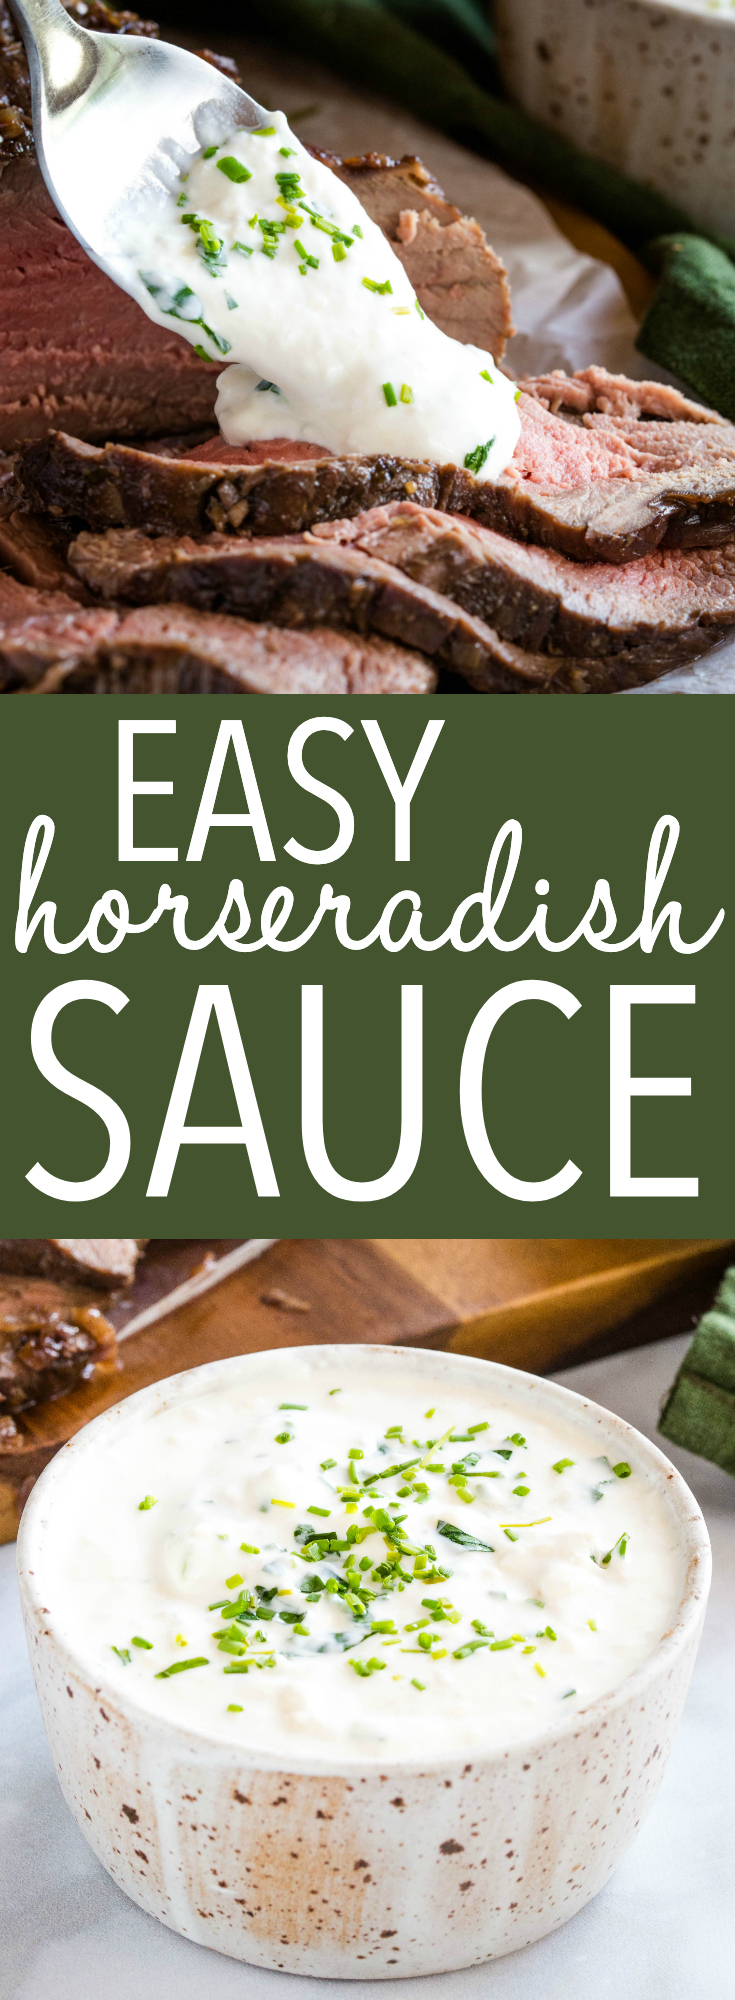 This Best Ever Easy Horseradish Sauce is perfectly creamy, spicy, and packed with fresh herbs. Easy to make, and the perfect condiment to serve with roast beef, beef tenderloin, or prime rib! Recipe from thebusybaker.ca! #horseradishsauce #sauce #primerib #beeftenderloin #roastbeef #condiment #homemadesauce via @busybakerblog